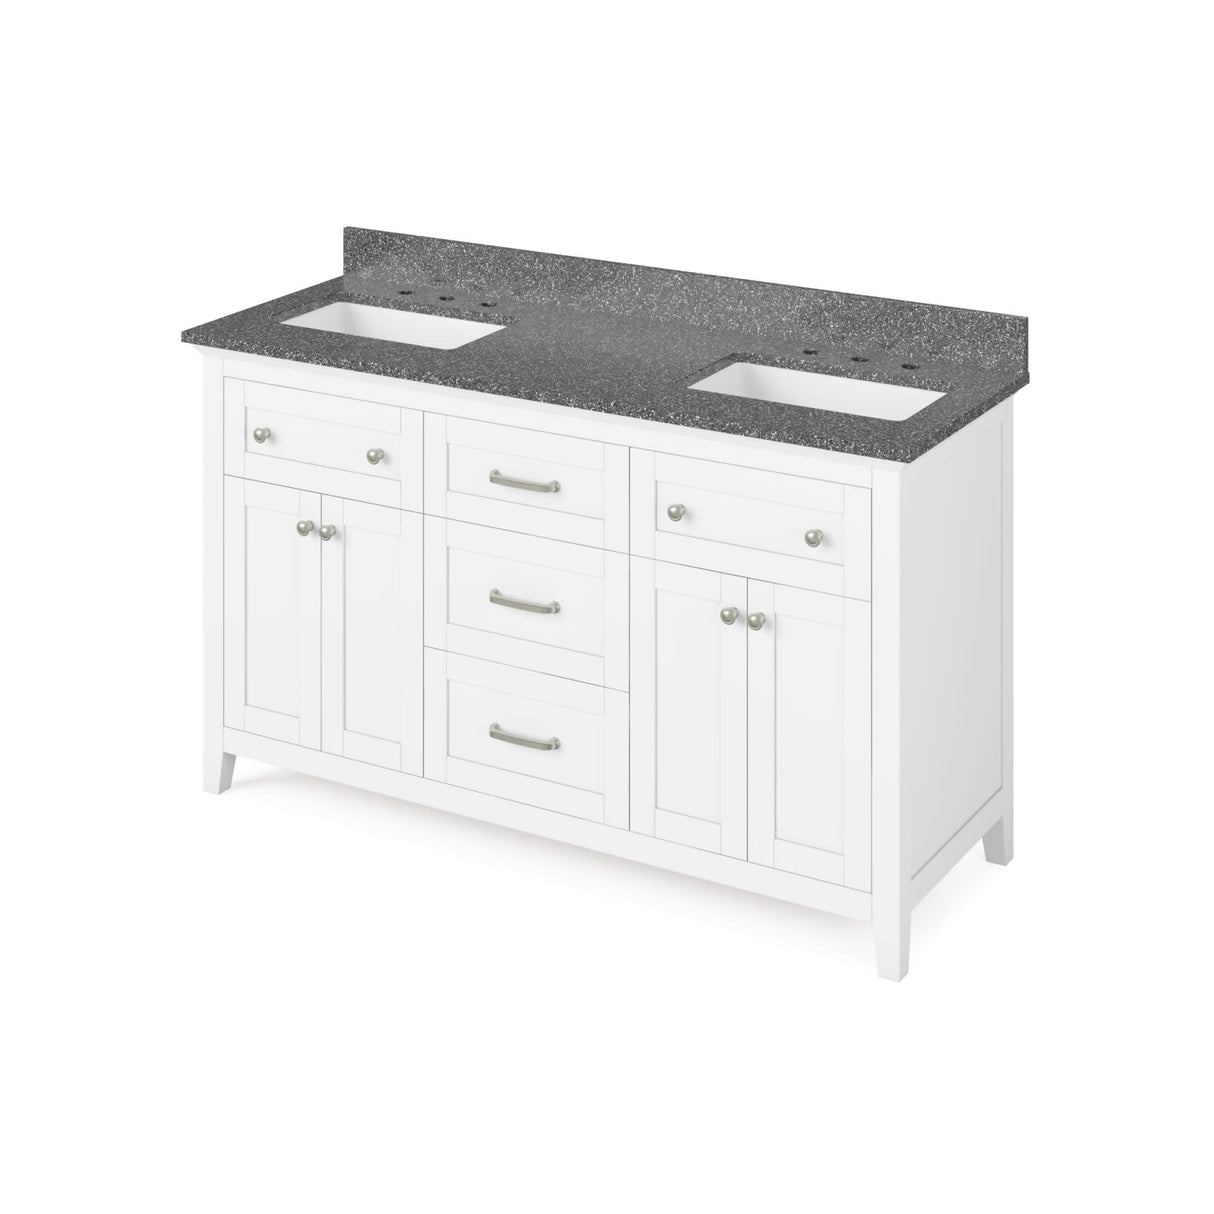 Jeffrey Alexander VKITCHA60WHBOR 60" White Chatham Vanity, double bowl, Boulder Cultured Marble Vanity Top, two undermount rectangle bowls